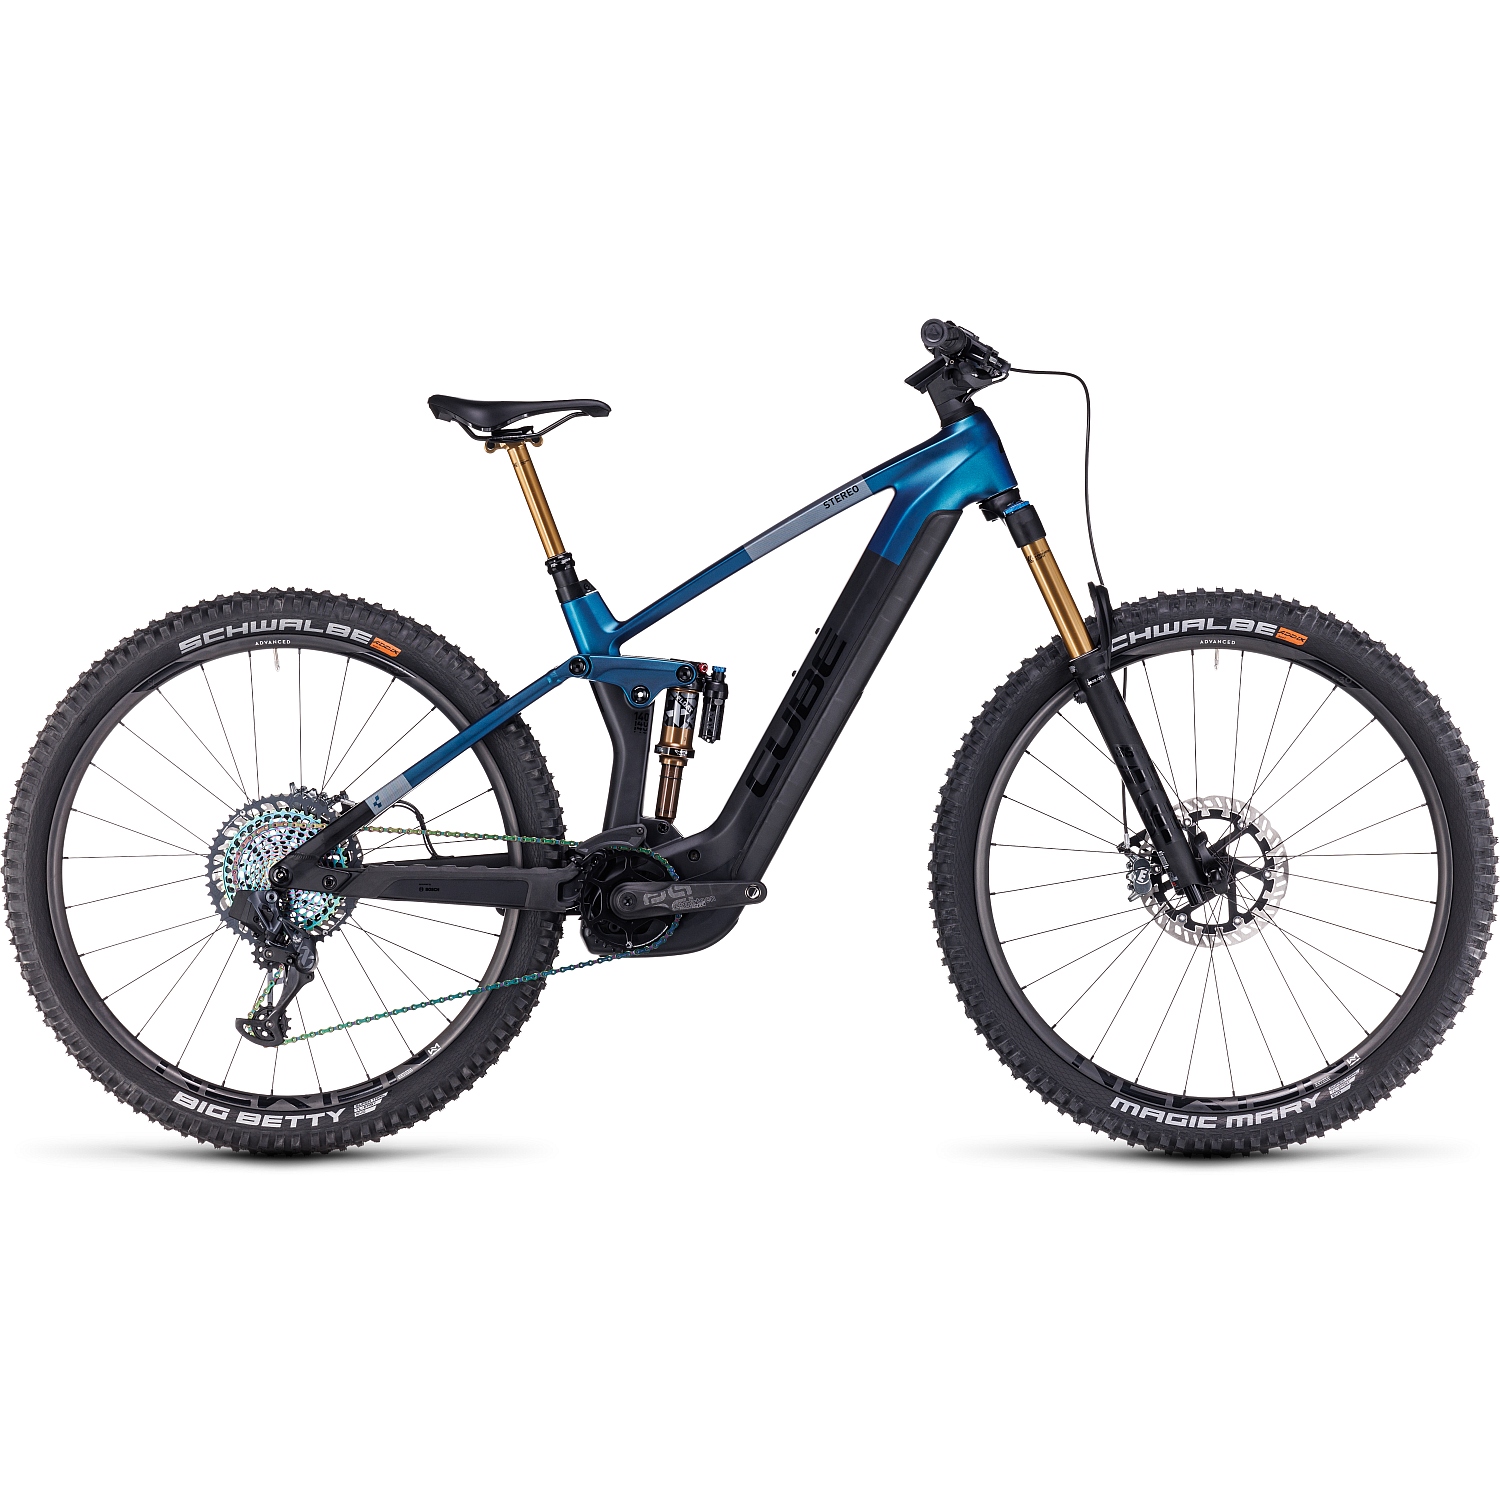 Picture of CUBE STEREO HYBRID 140 HPC SLT 750 - Carbon Electric Mountainbike - 2023 - nebula / carbon